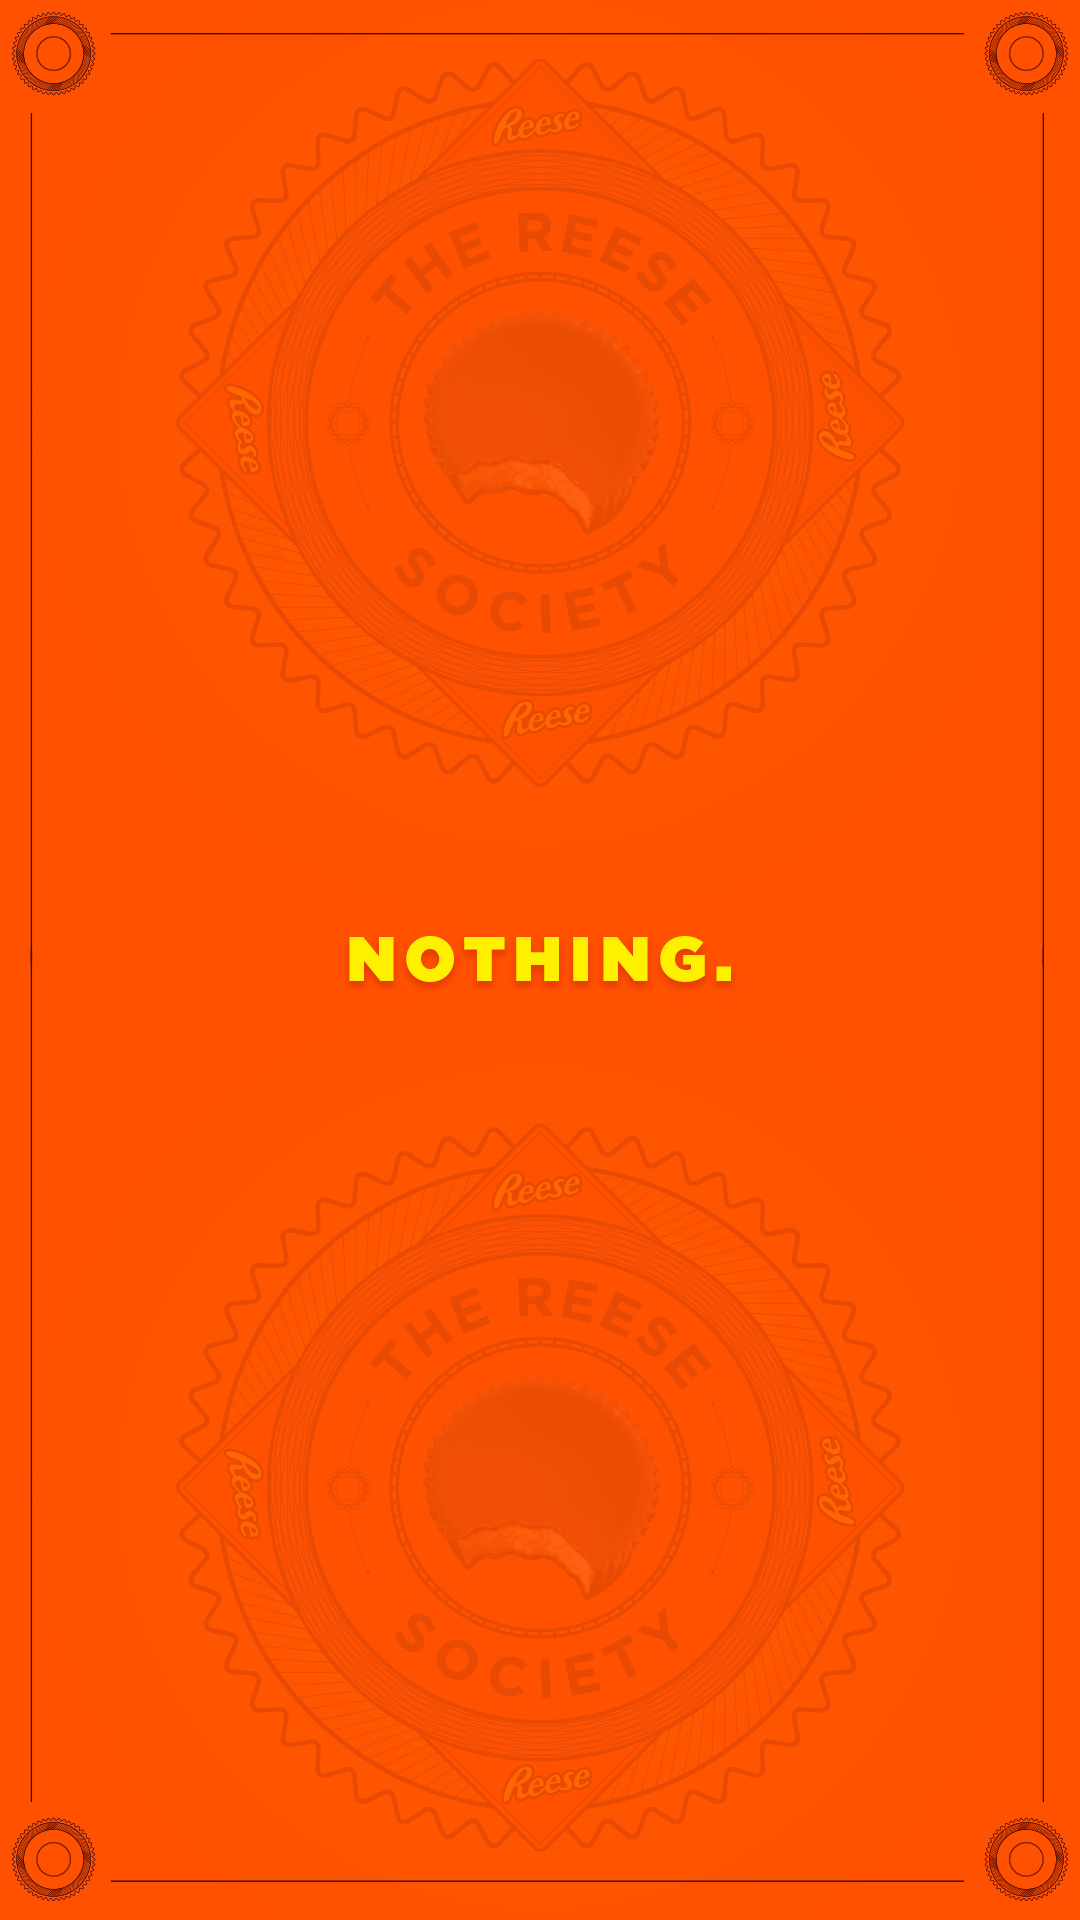 Reese-Society-IG_0030_Nothing.png